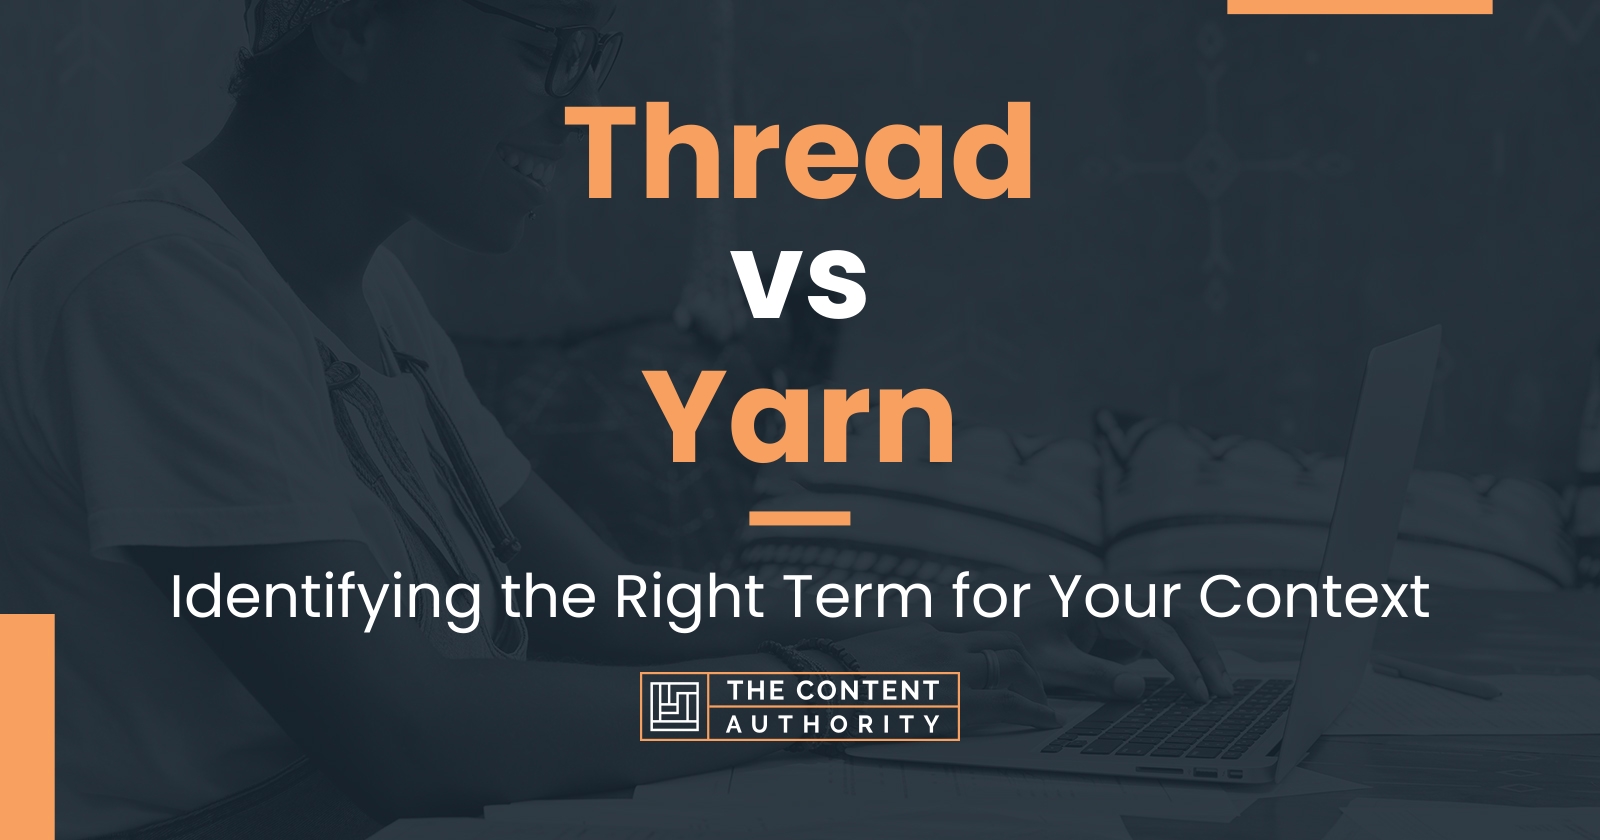 Thread vs Yarn: Identifying the Right Term for Your Context